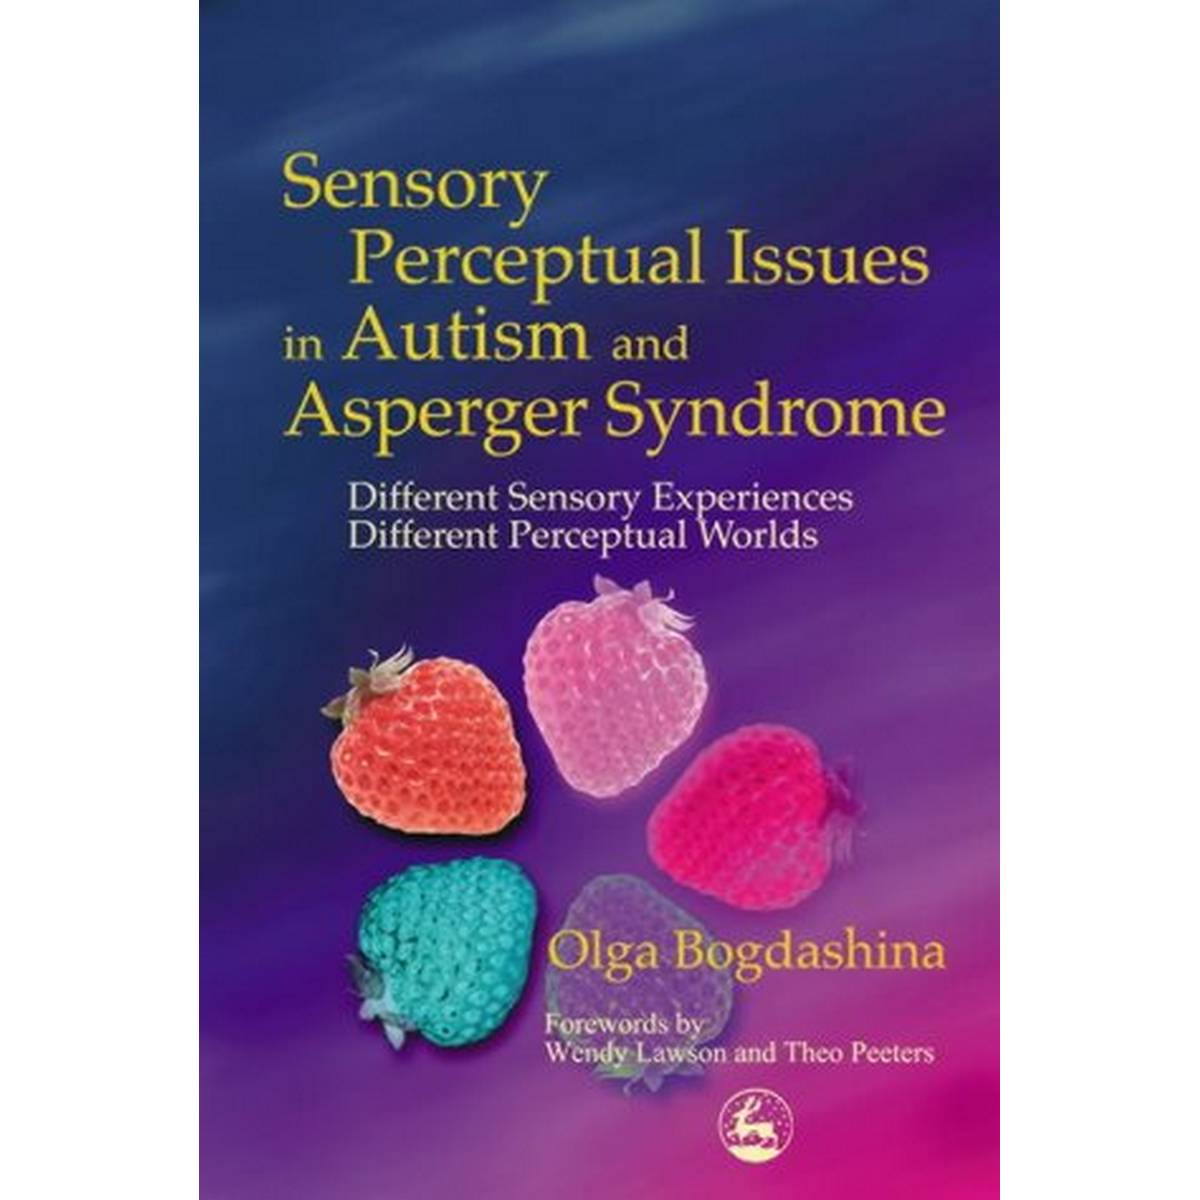 Sensory Perceptual Issues in Autism and Asperger Syndrome